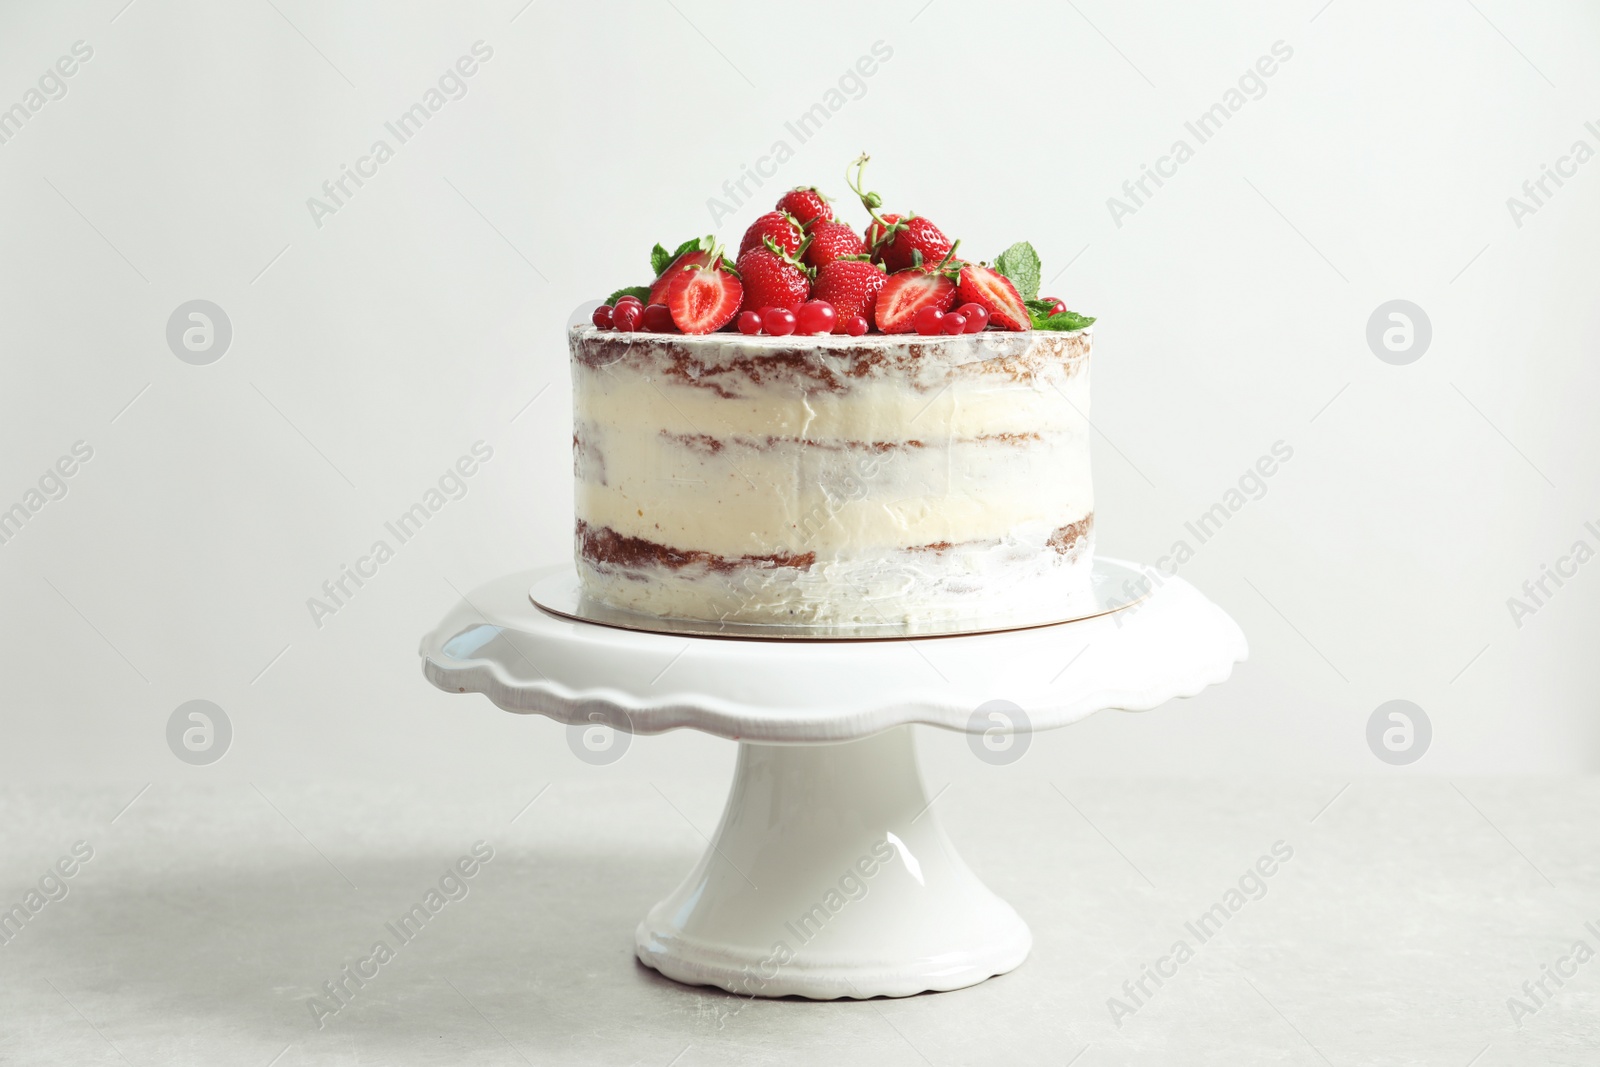 Photo of Delicious homemade cake with fresh berries on stand against light background